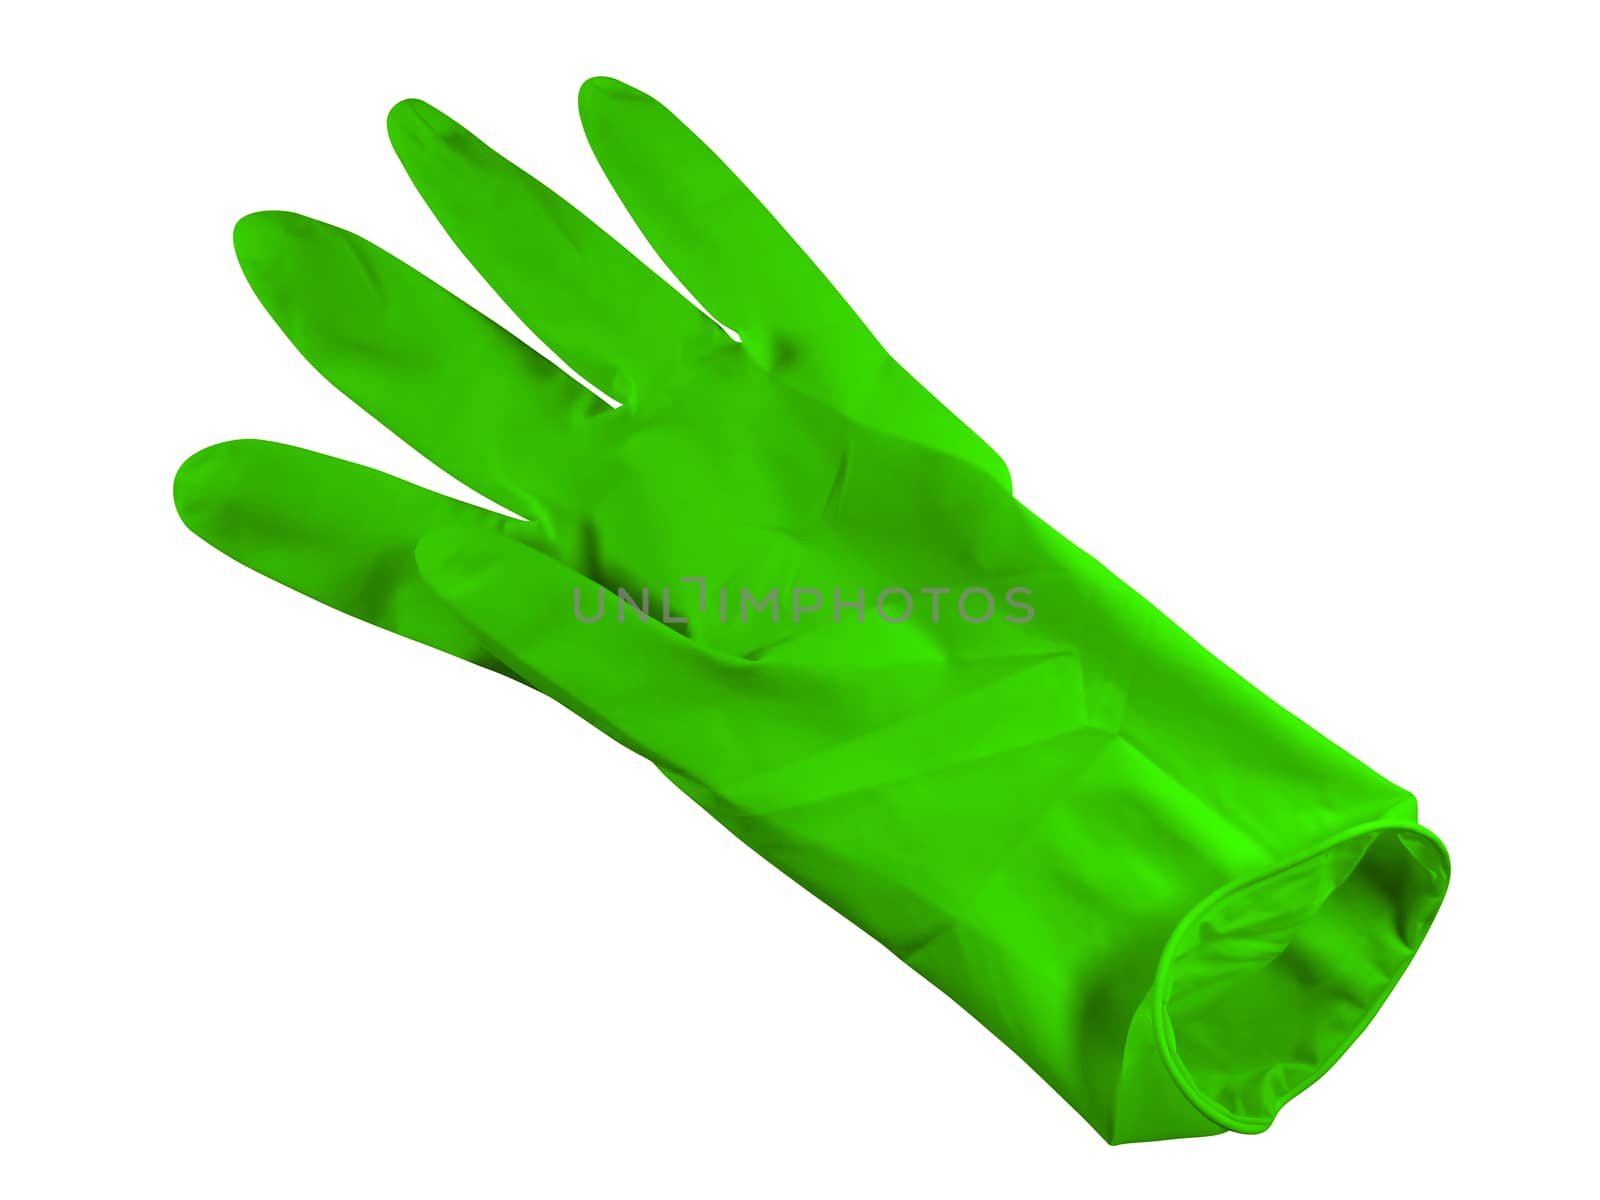 Green medical rubber glove, isolated on white background. Clipping Path included.